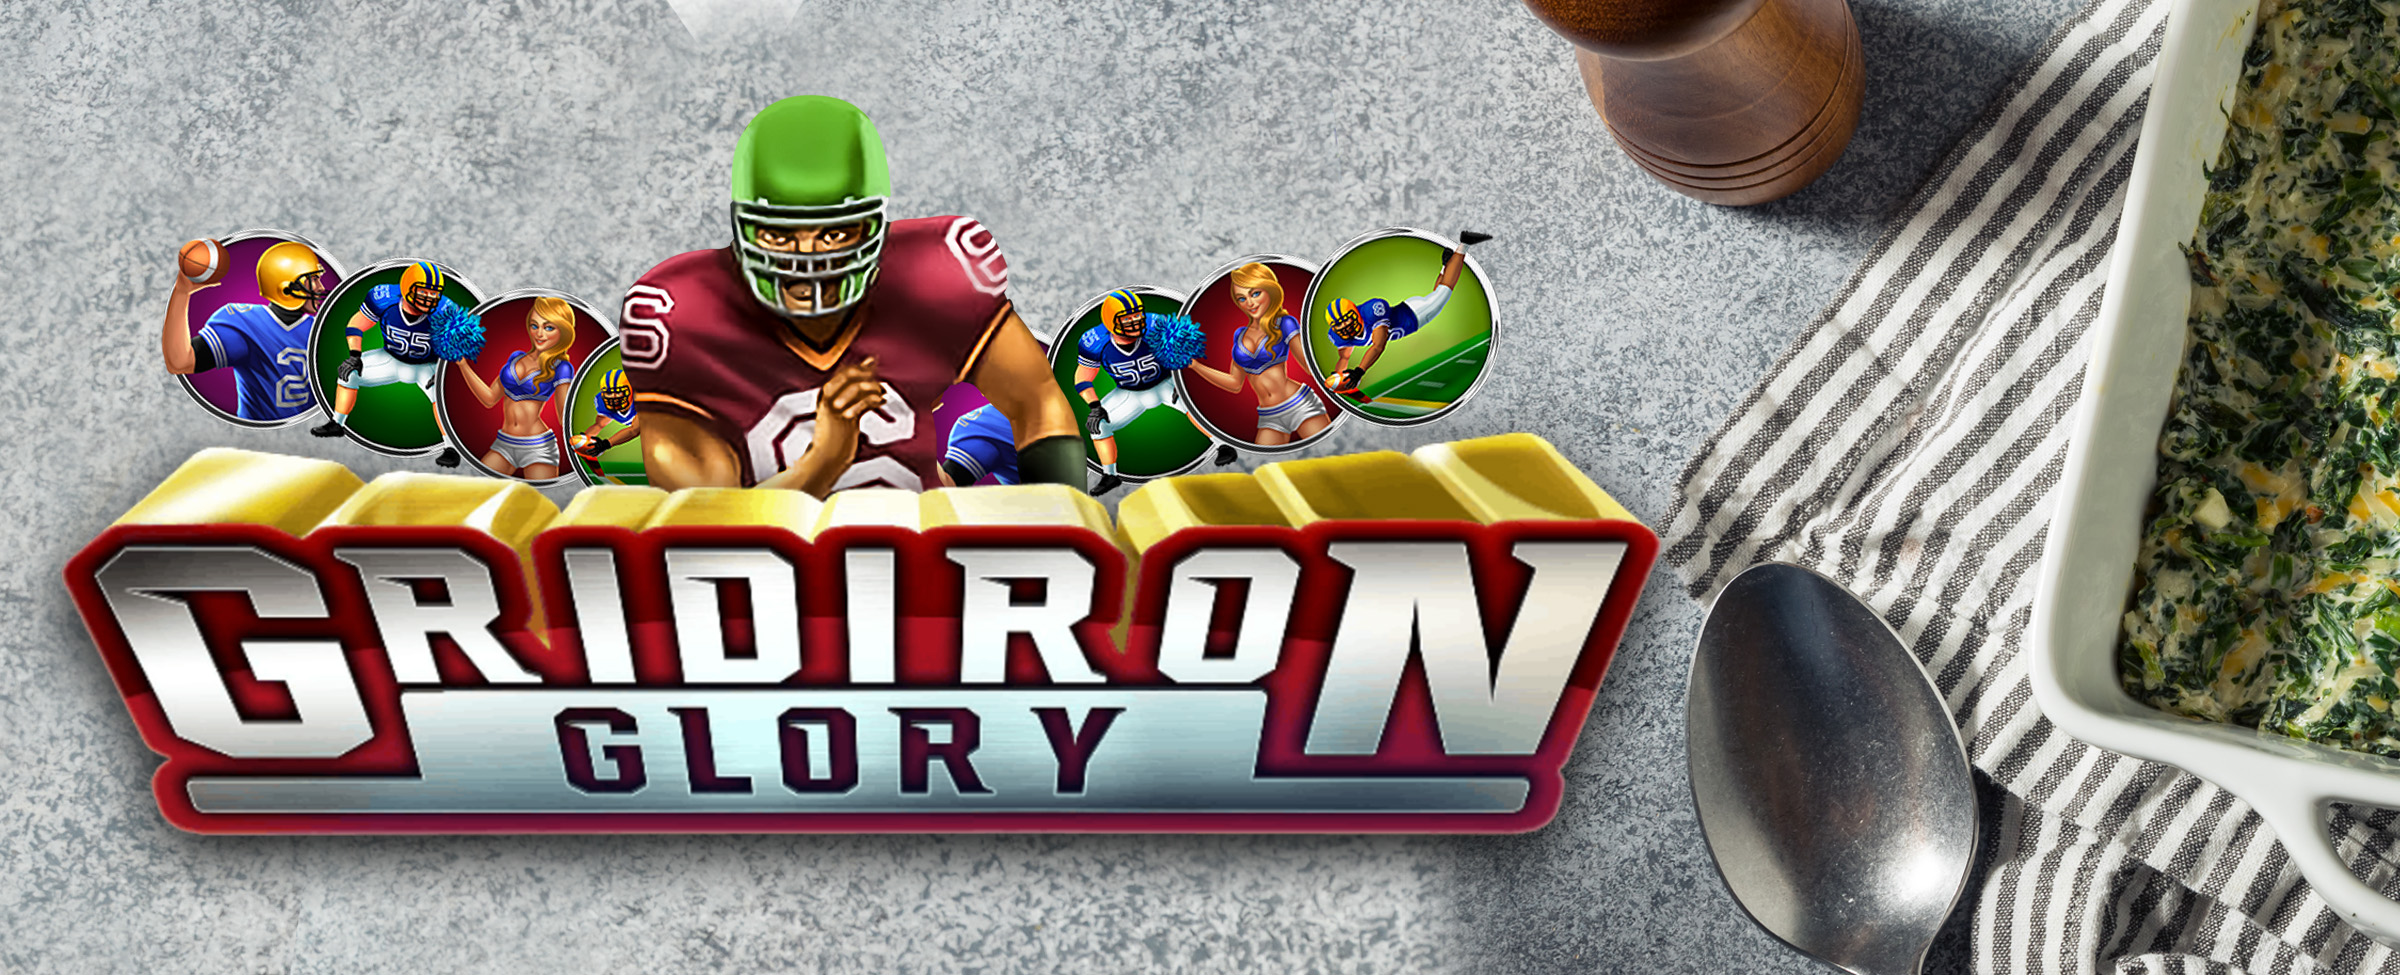 A large, animated logo from the Cafe Casino slot game, Gridiron Glory, is featured next to a tea striped towel with a dish of baked spinach dip on top, with a spoon and pepper shaker off to the side.